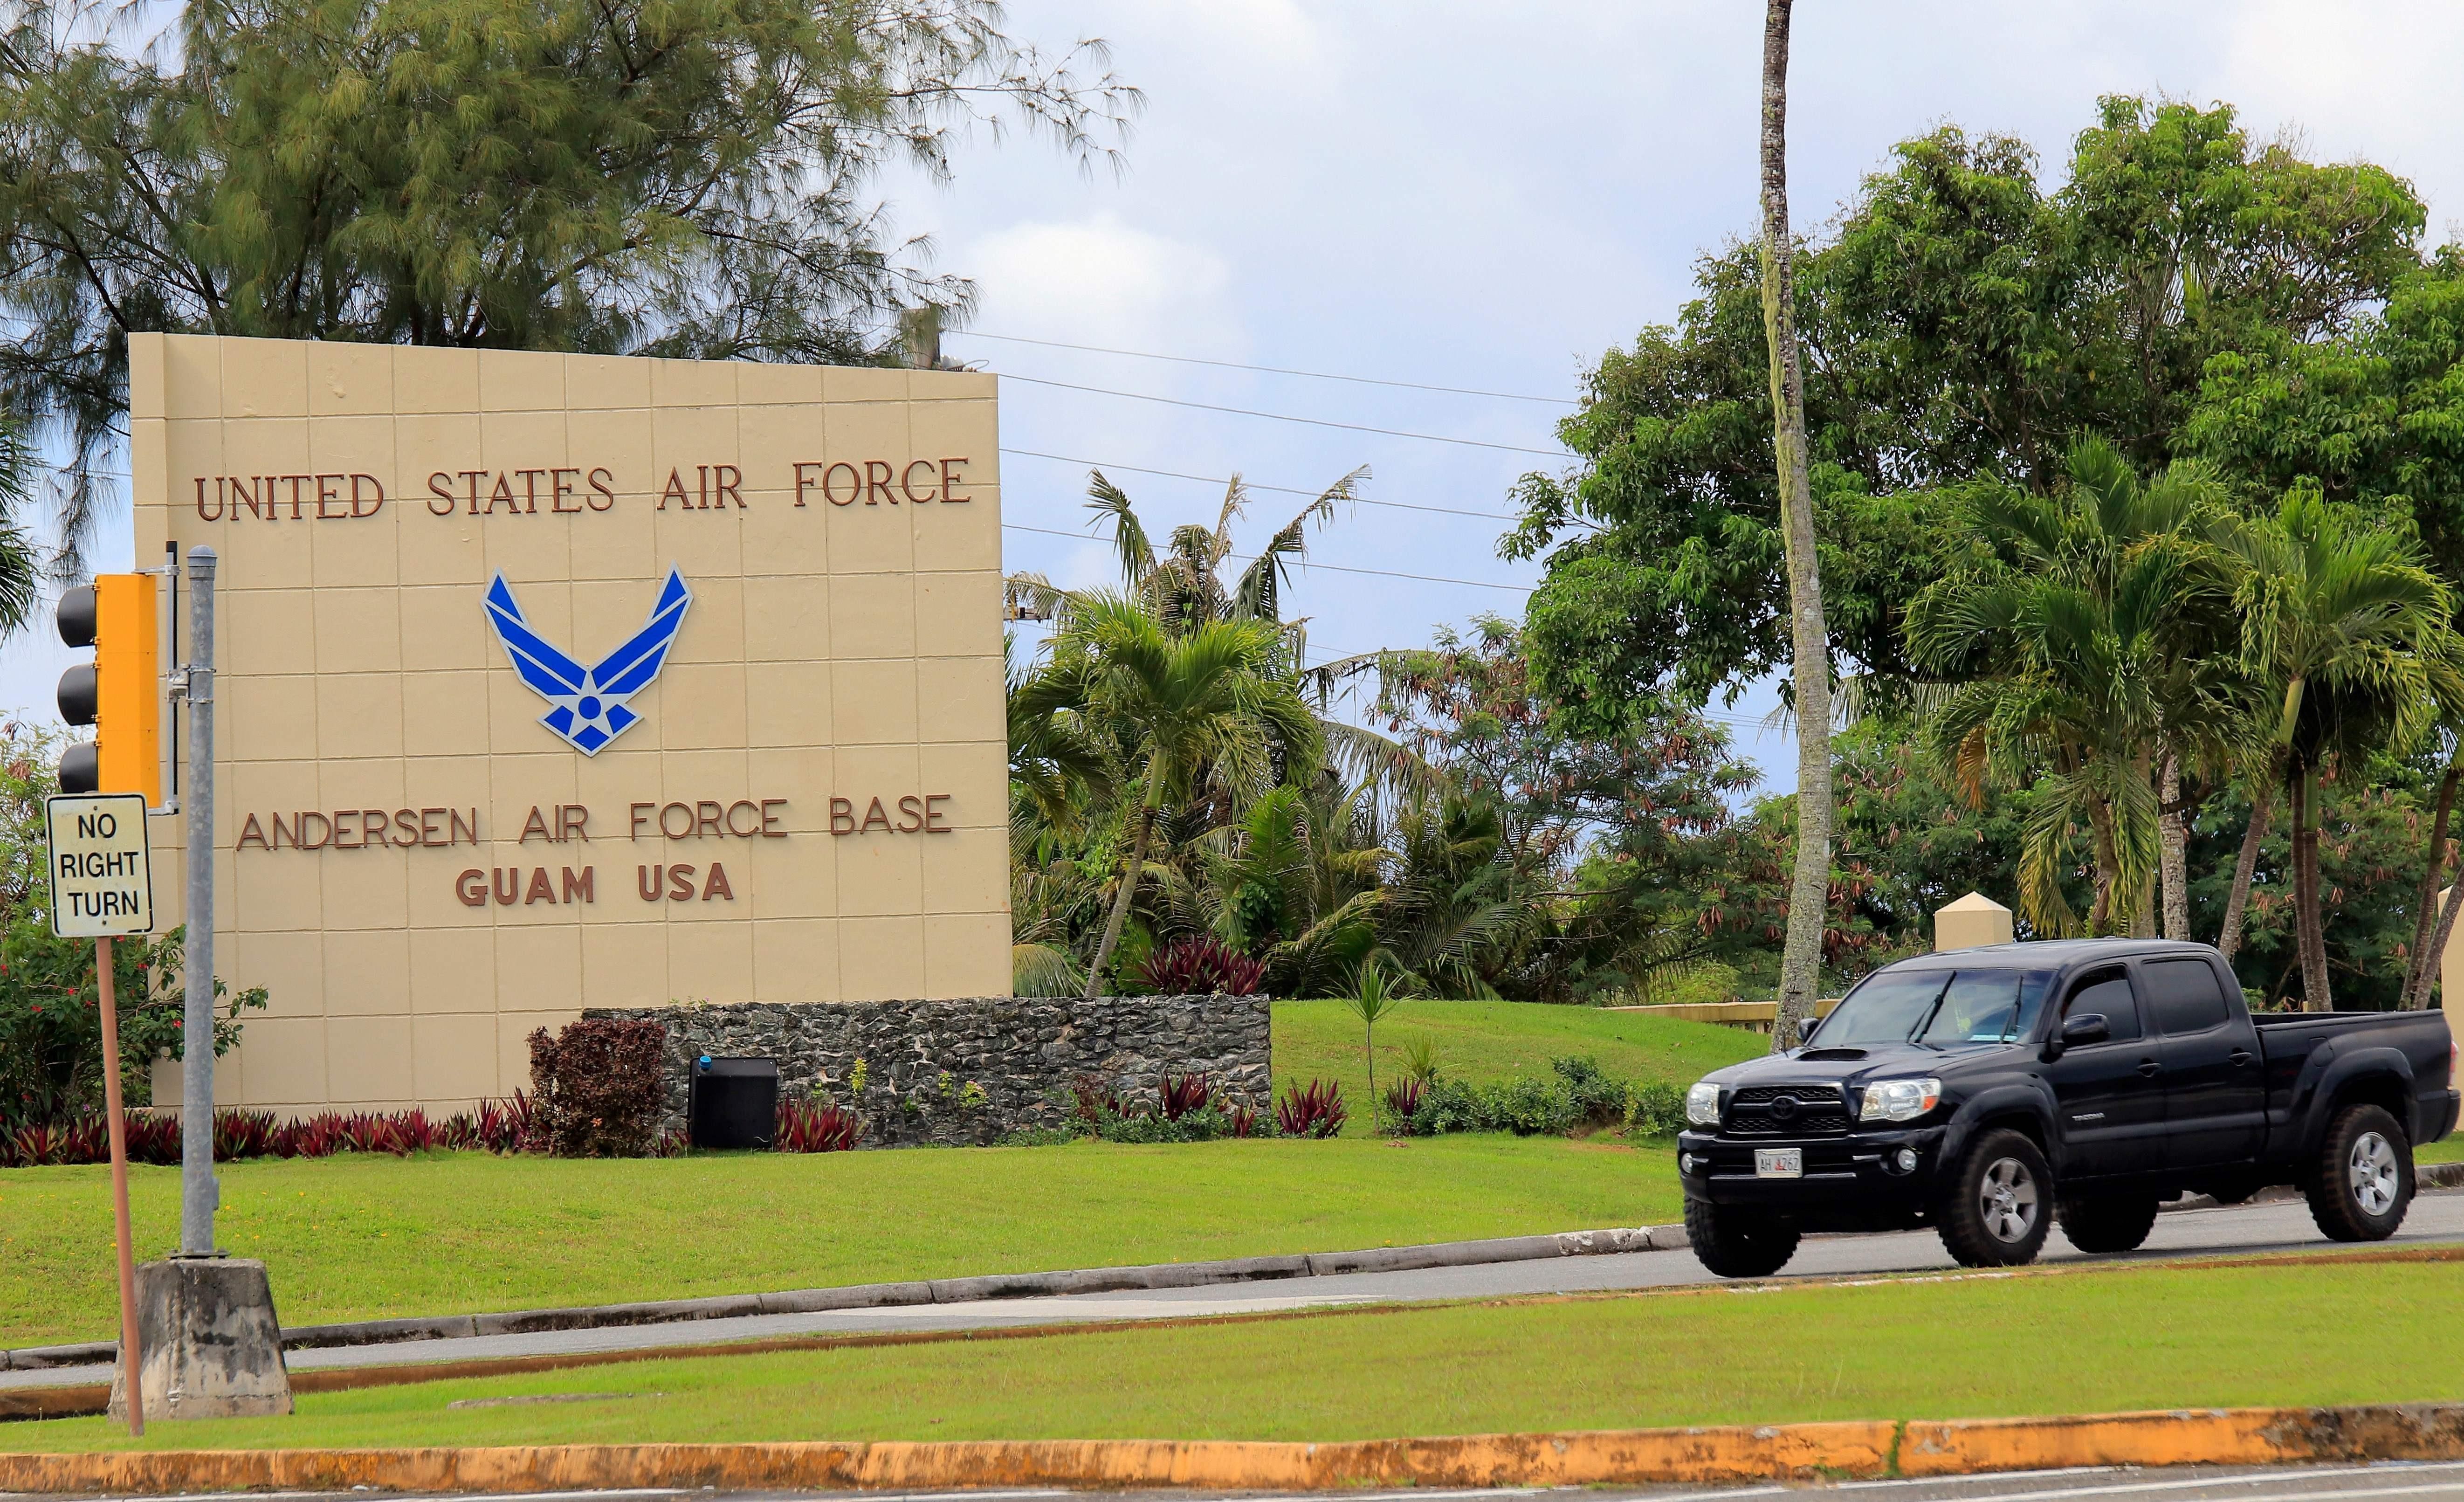  Guam: one of the countless islands of the Pacific used by the United States military as a base. (Photo: VIRGILIO VALENCIA/AFP/Getty Images)